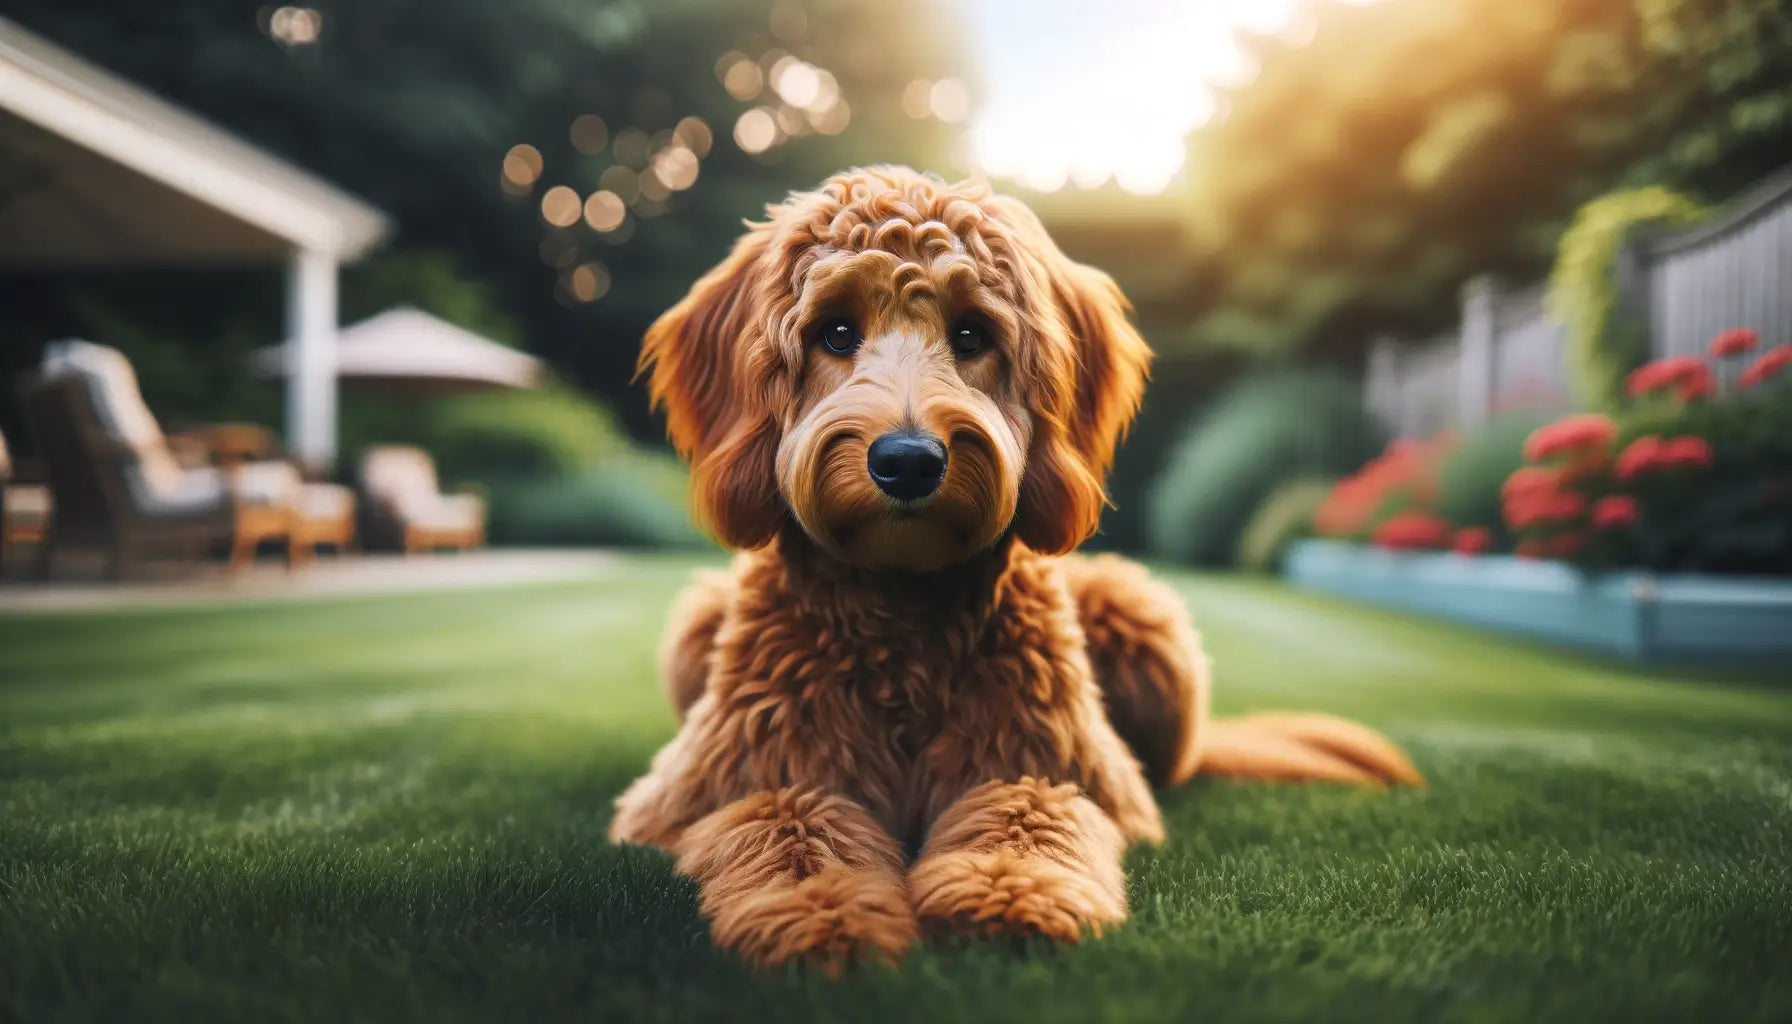 Red Goldendoodle lying on the grass, focused and attentive, showcasing its energetic and alert nature.